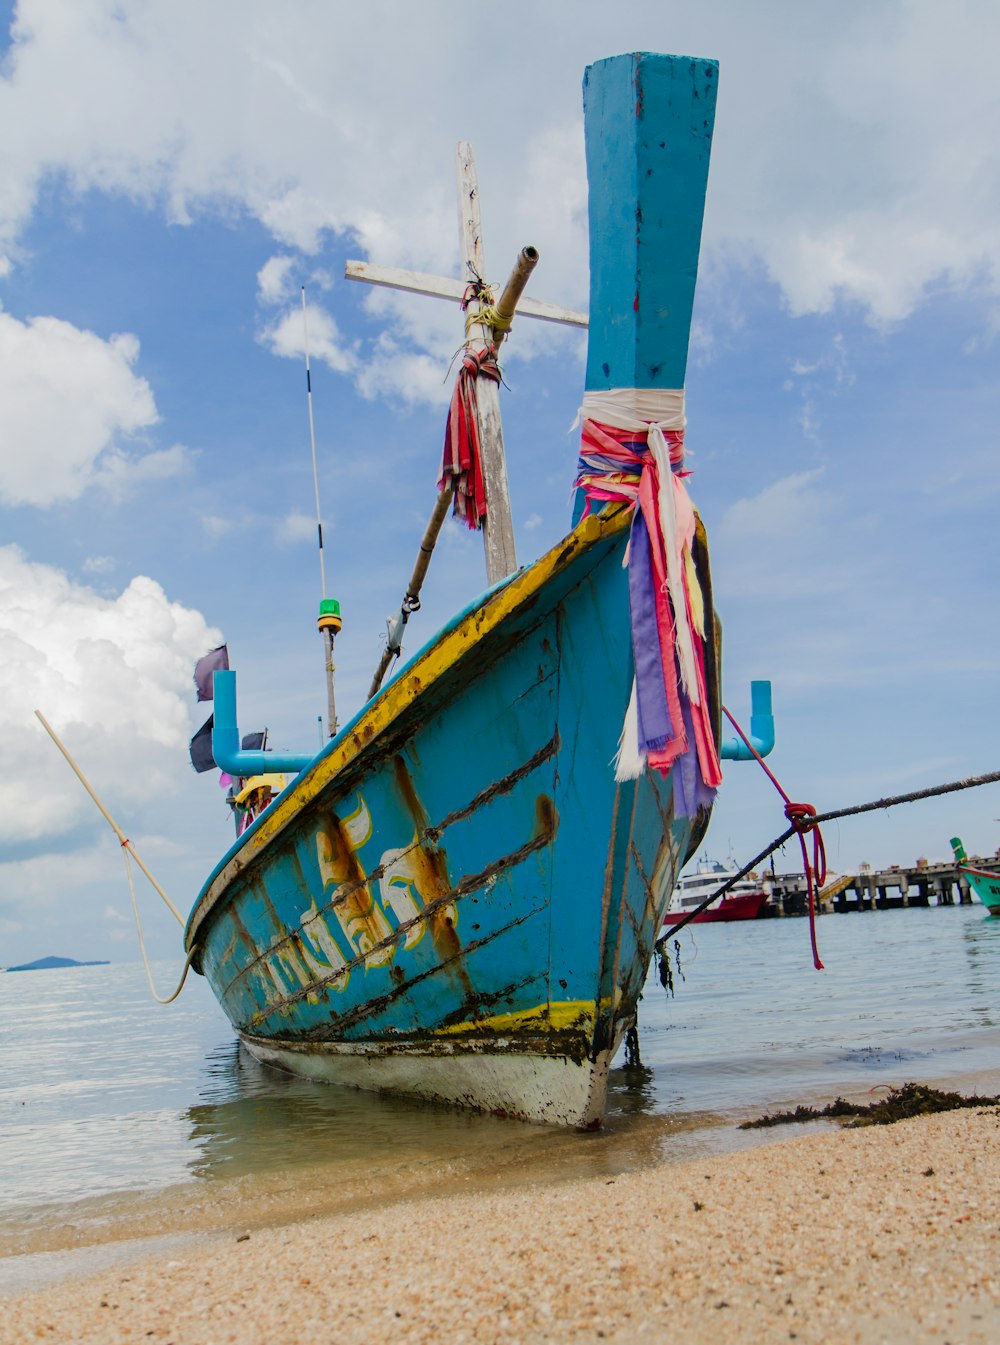 blue wooden boat on seashore during daytime